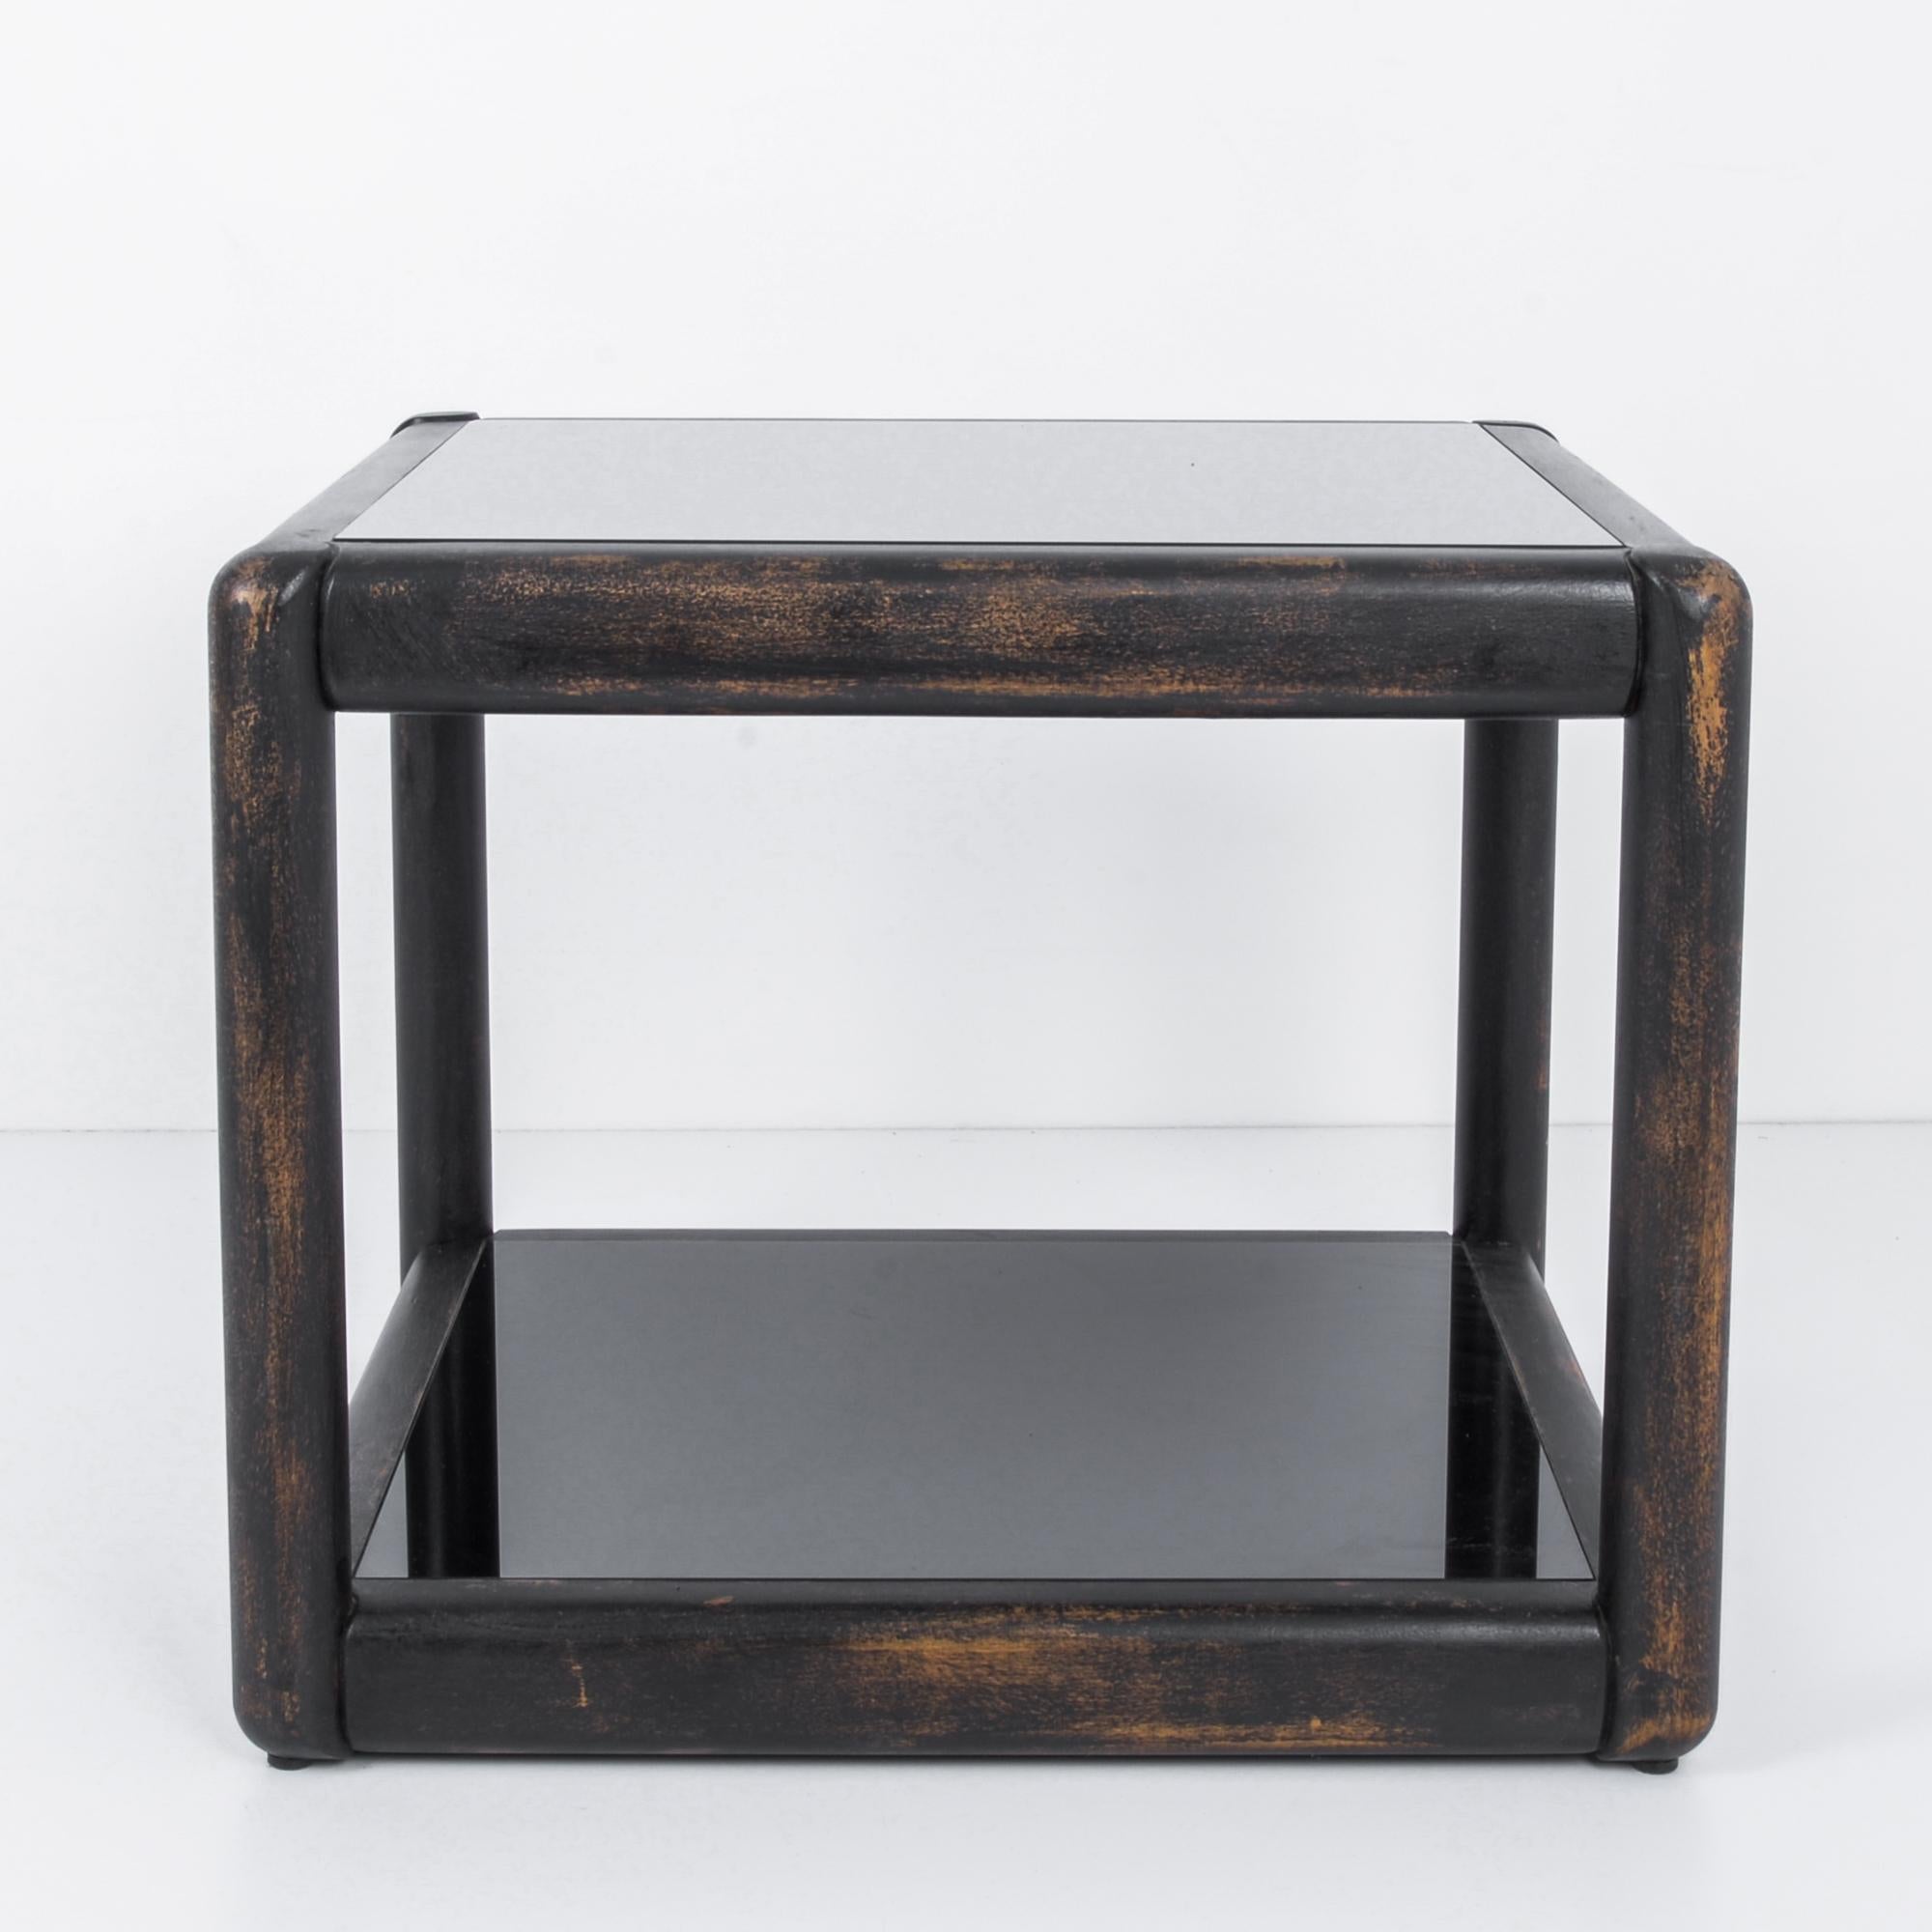 This side table was manufactured by TON, known for their timeless designs and use of high quality wood. It was made in the former Czechoslovakia, circa 1980, and features a geometric construction softened by rounded edges. The wooden frame is